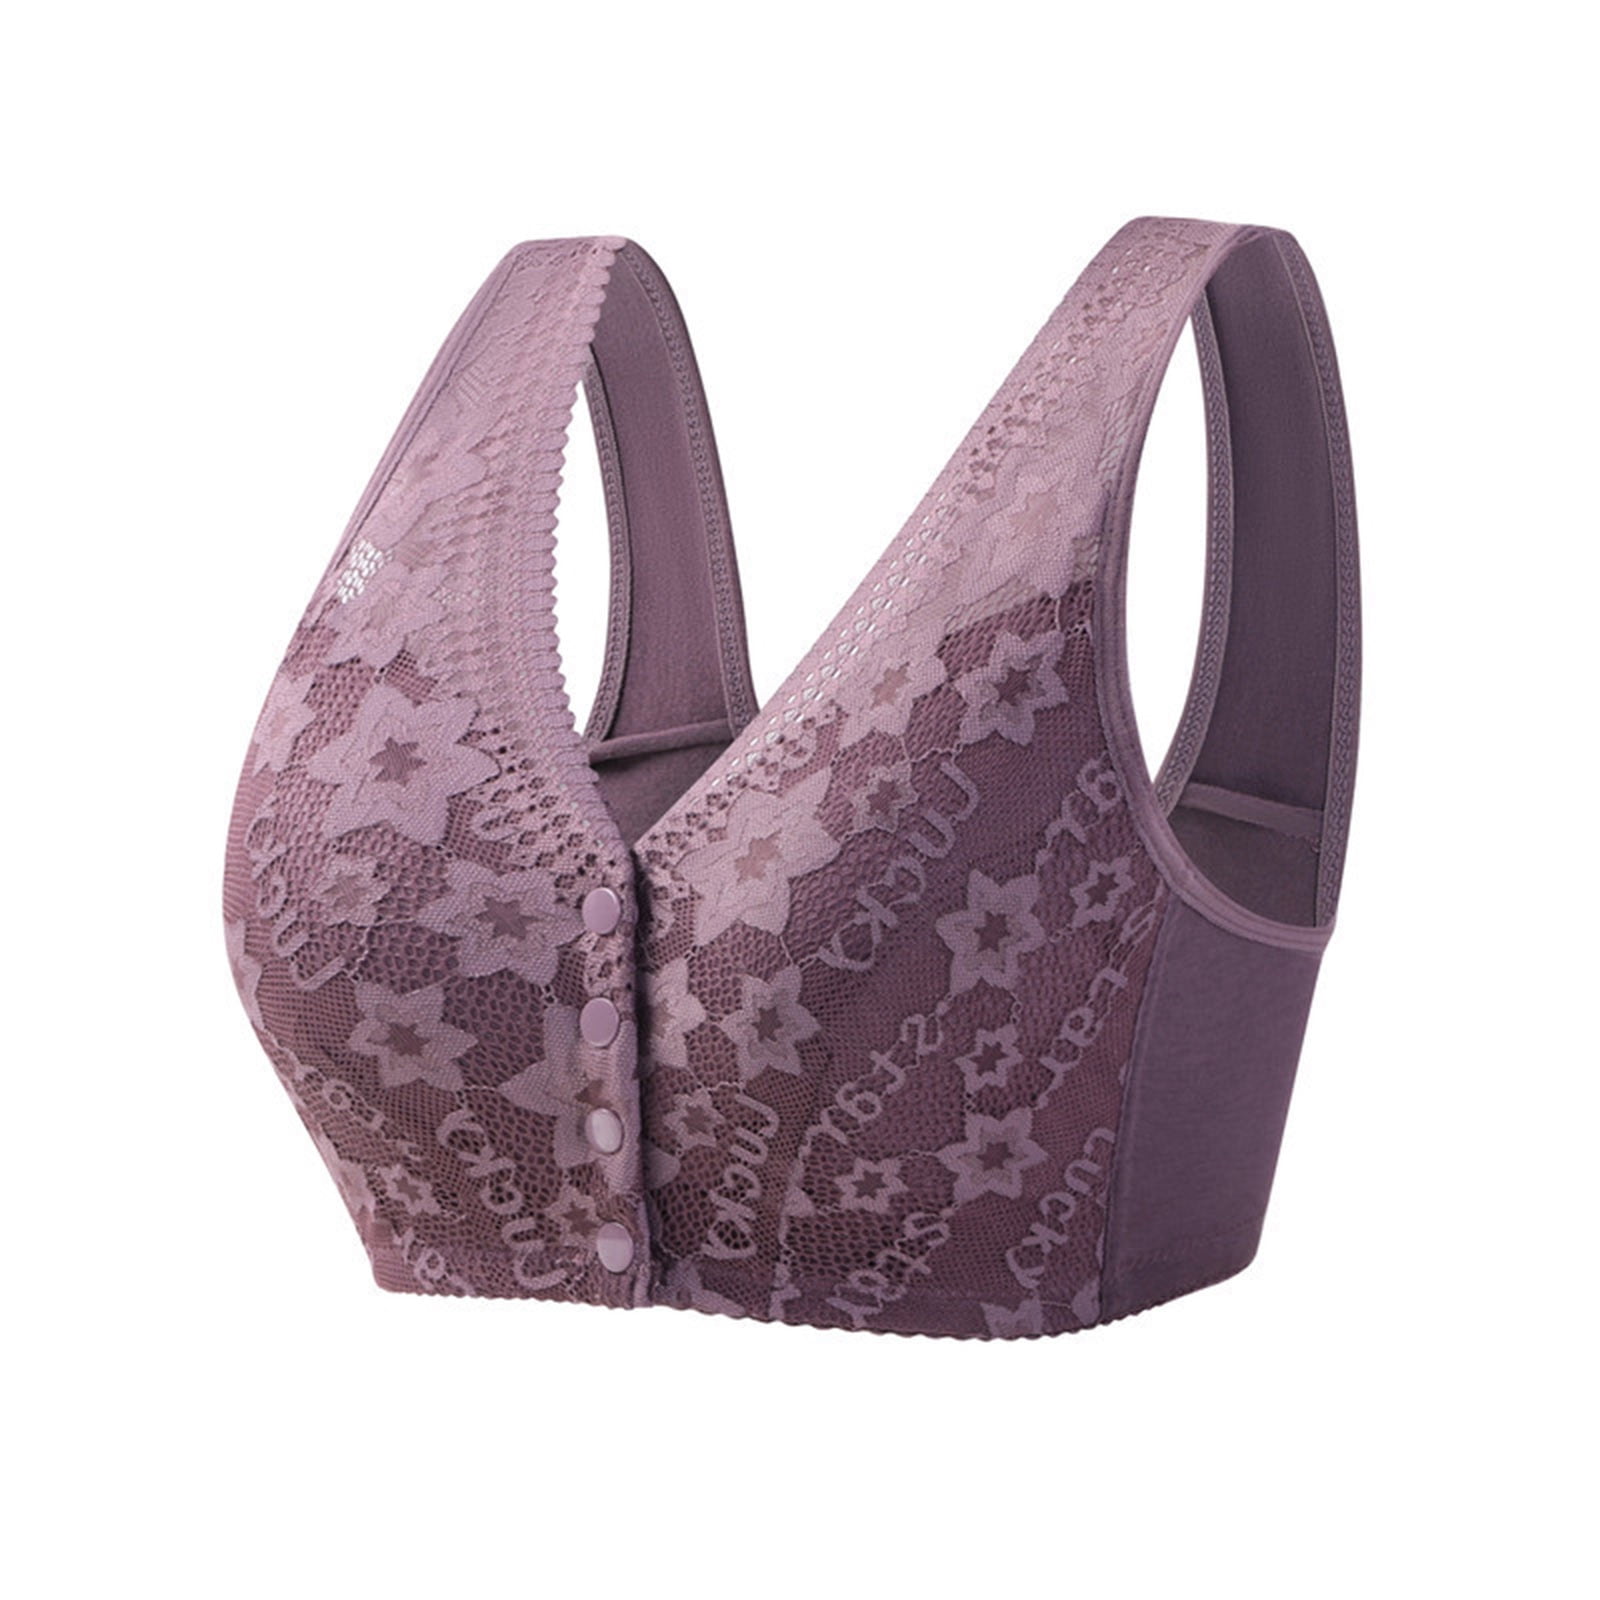 Printed Padded ROUND STITCH FRONT OPEN COTTON BRA, For Daily Wear